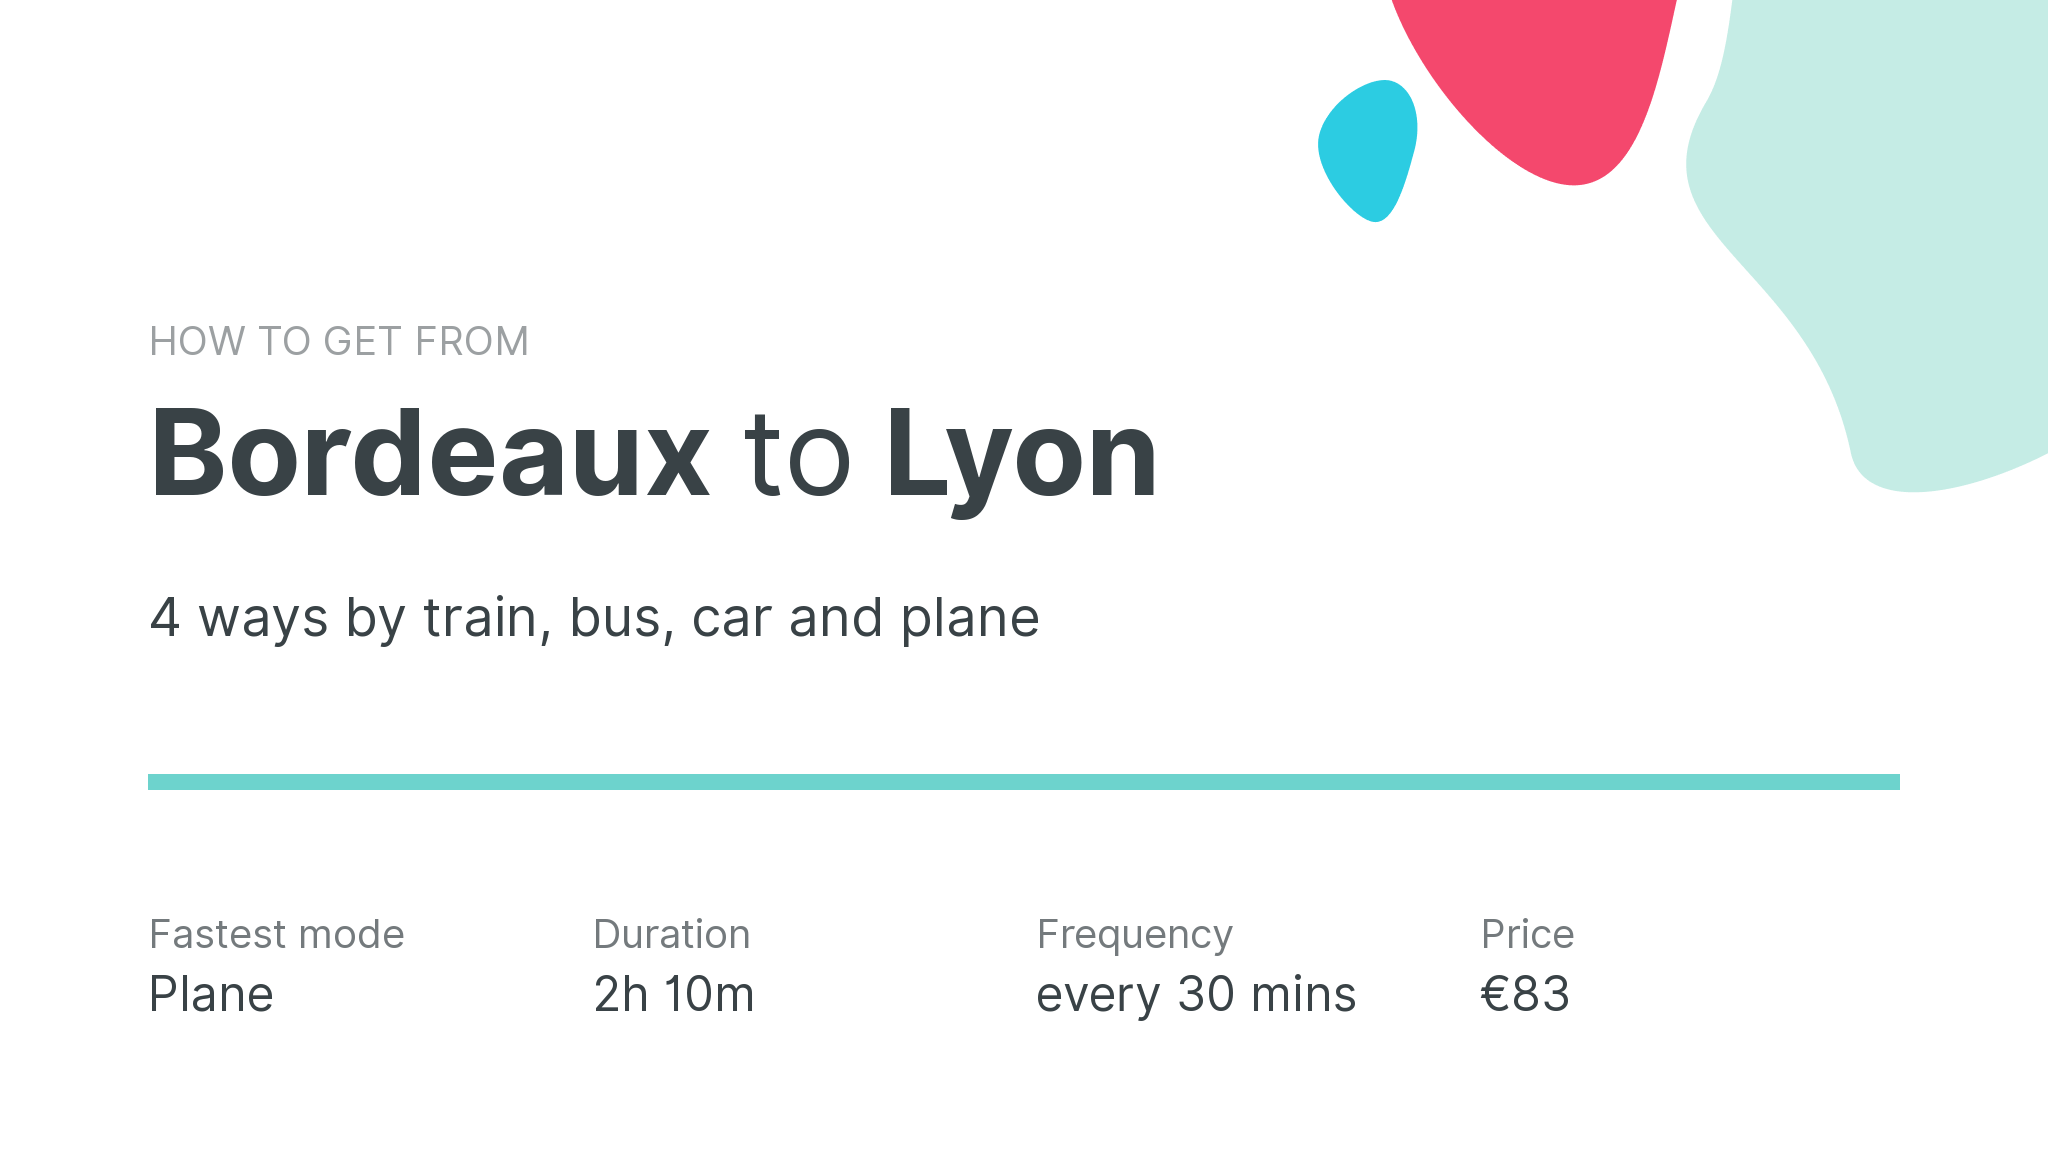 How do I get from Bordeaux to Lyon